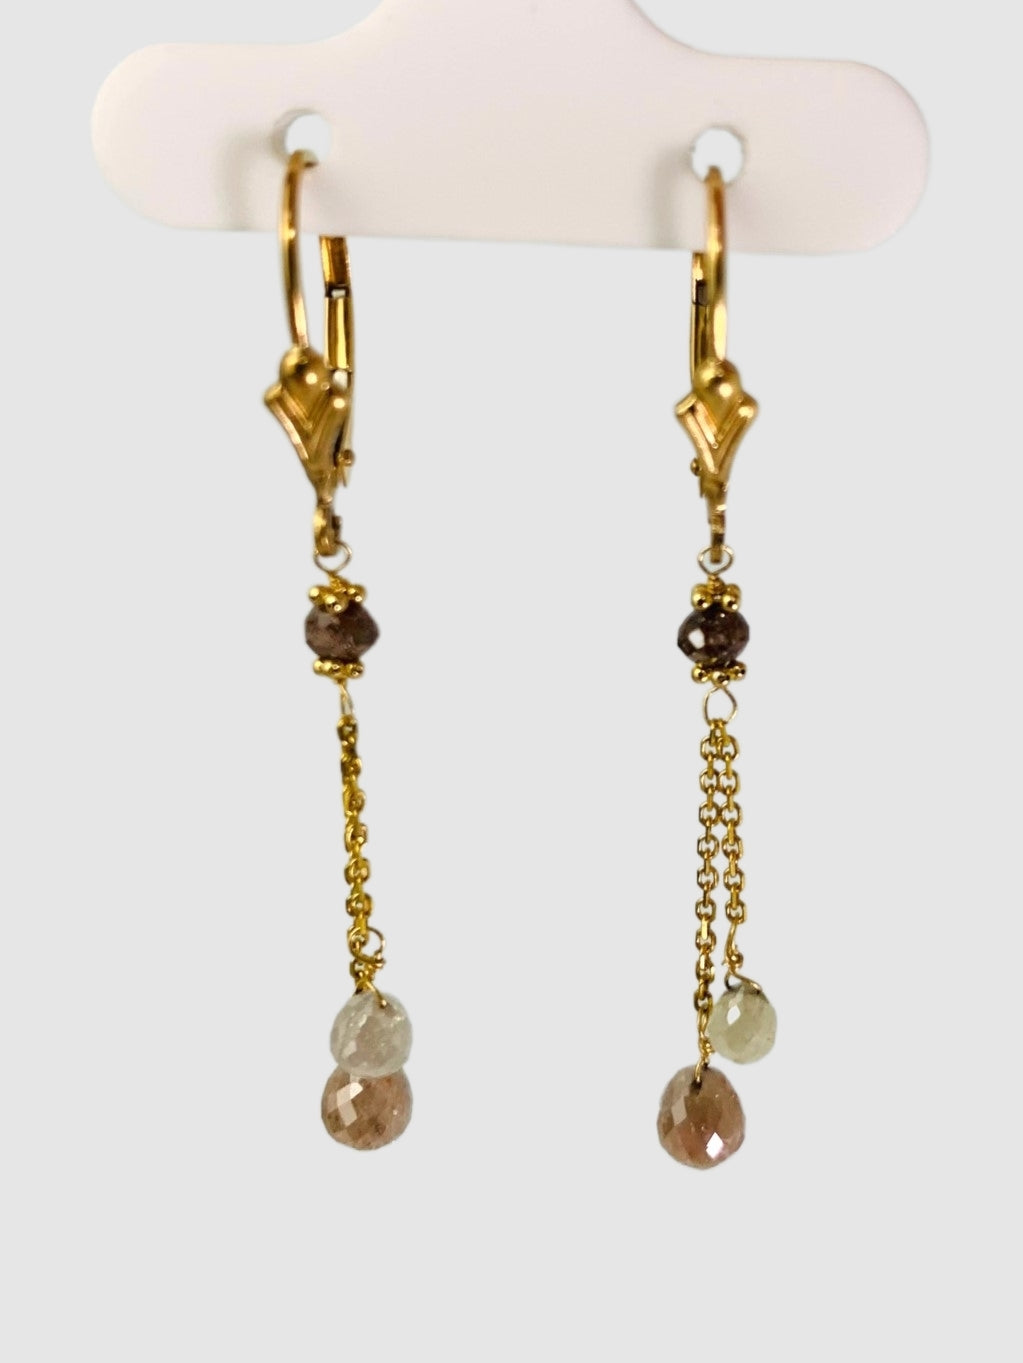 Lariat Earring With Reddish Brown, Blush And Grey Diamonds in 14KY - EAR-067-2DTSDIA14Y-BRN 2.5ctw